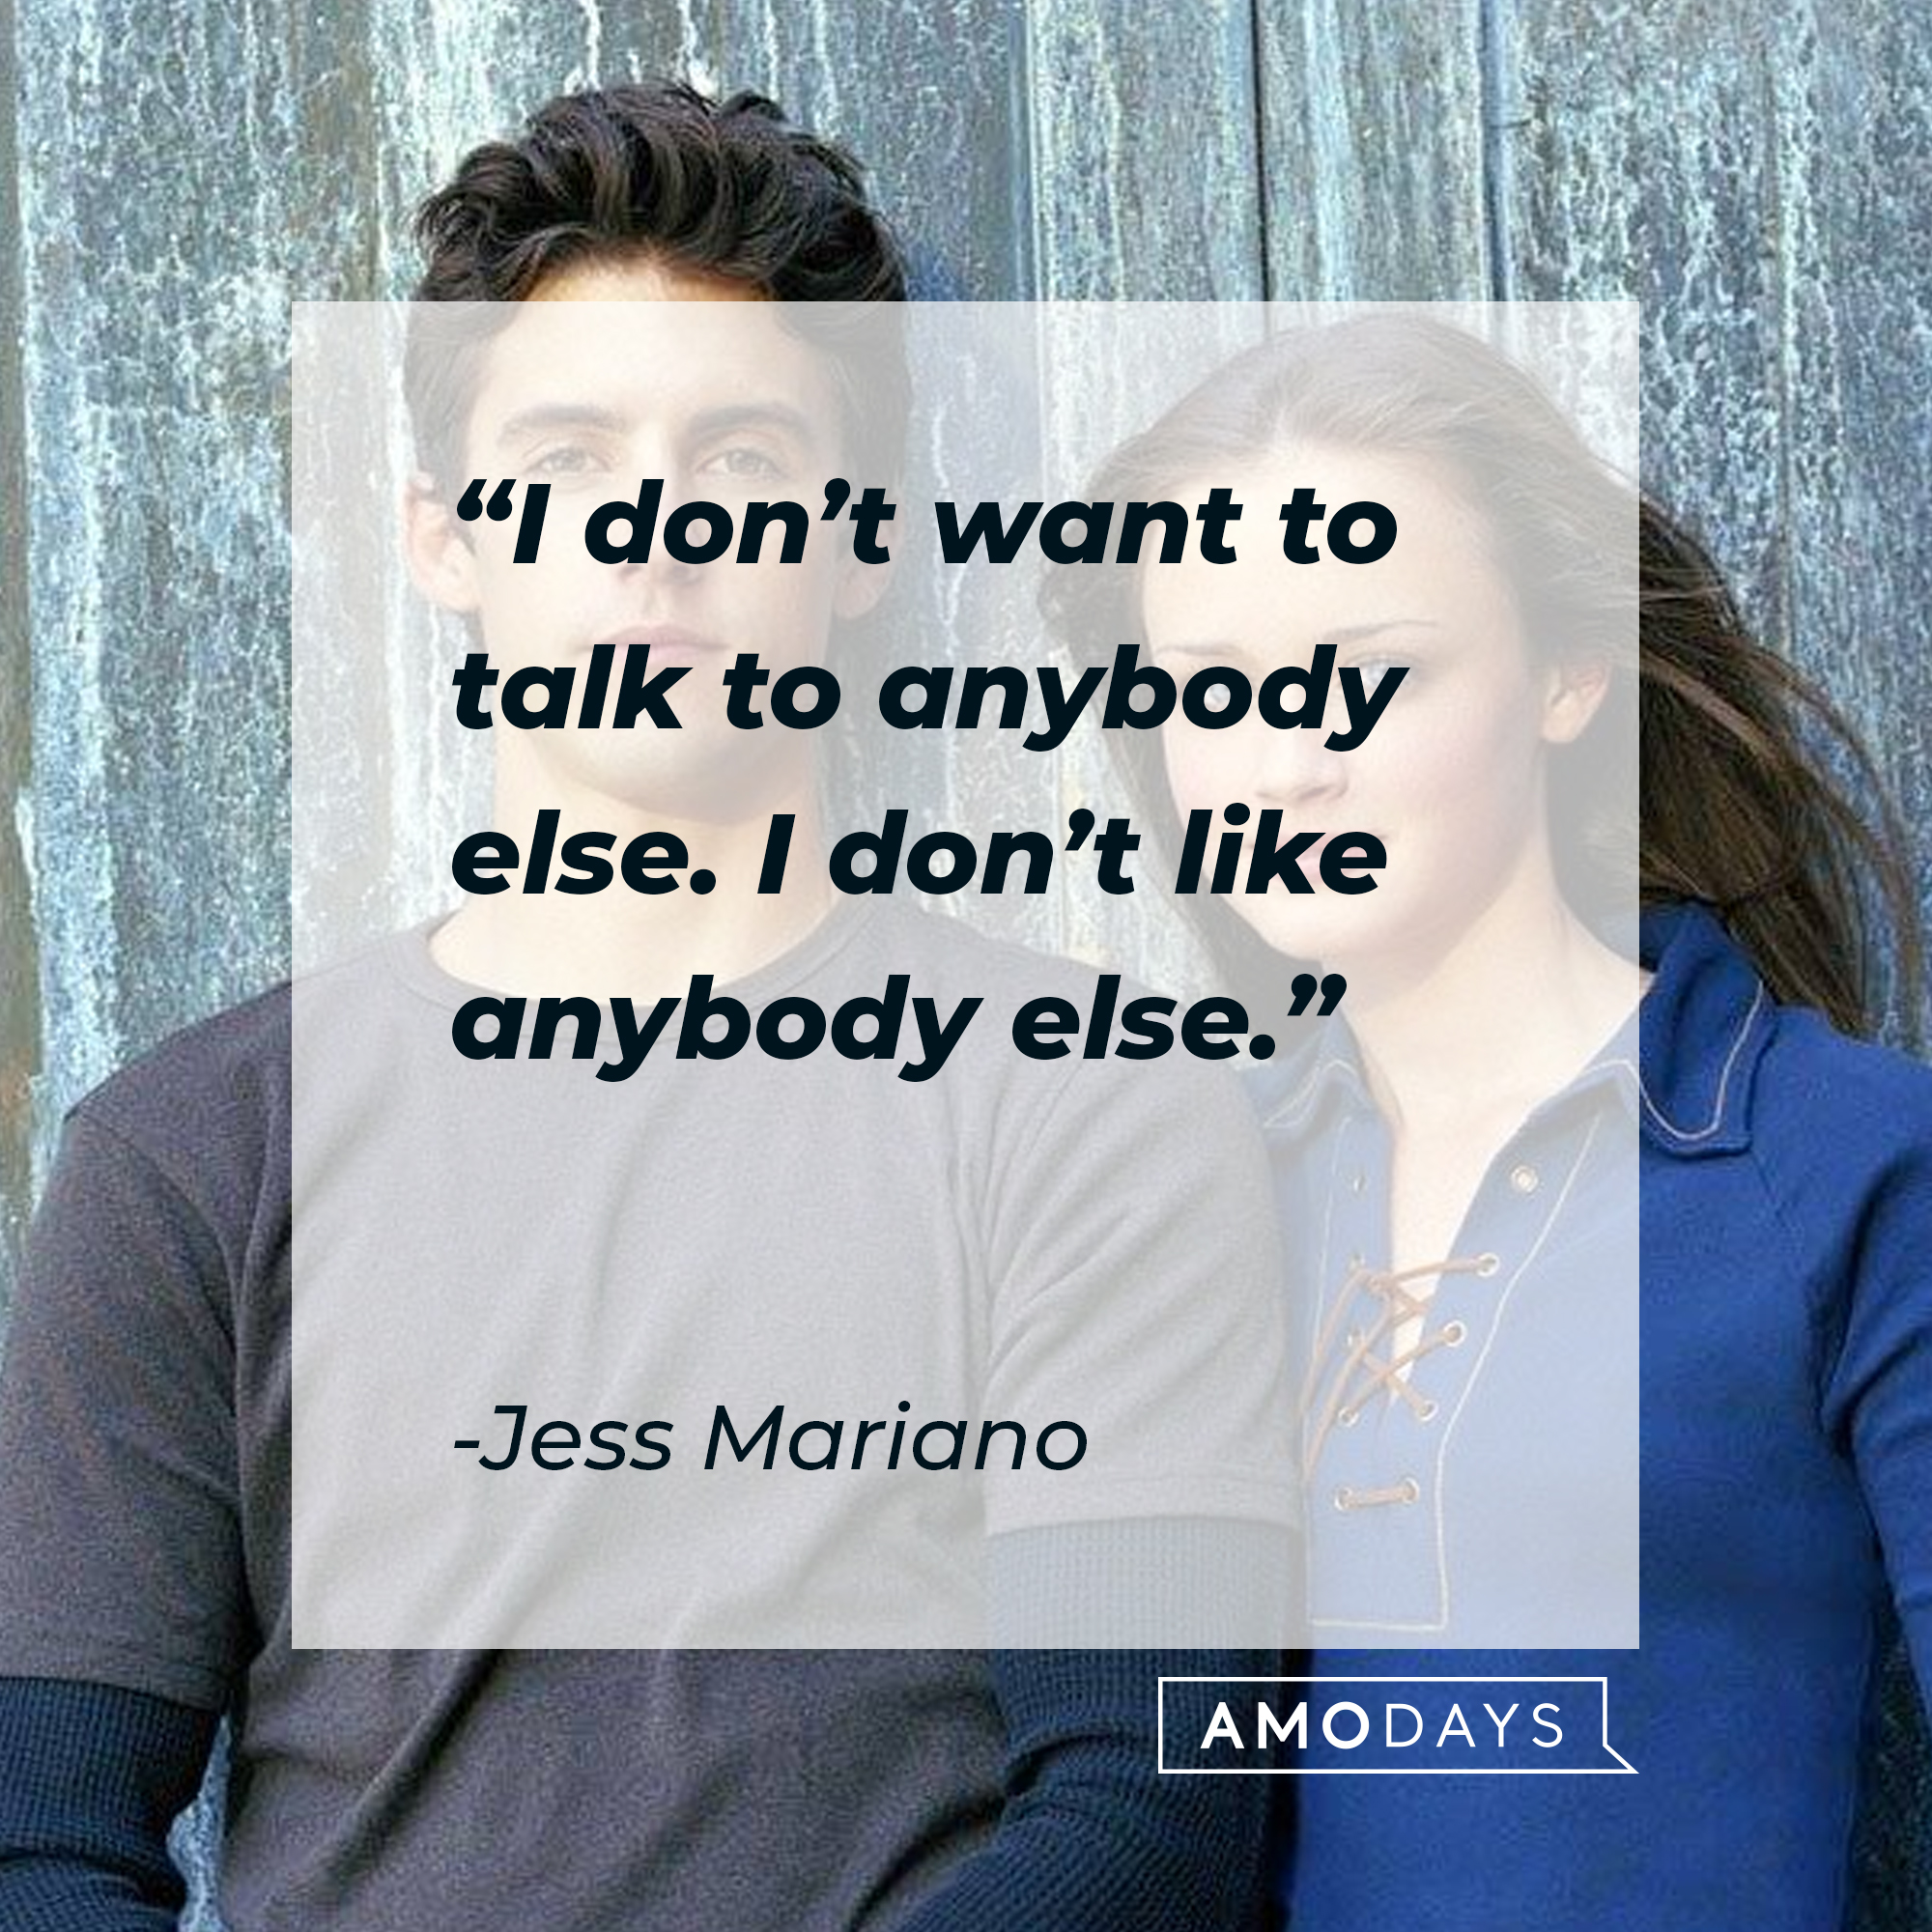 Rory Gilmore and Jess Mariano, with his quote: “I don’t want to talk to anybody else. I don’t like anybody else.” | Source: facebook.com/GilmoreGirls